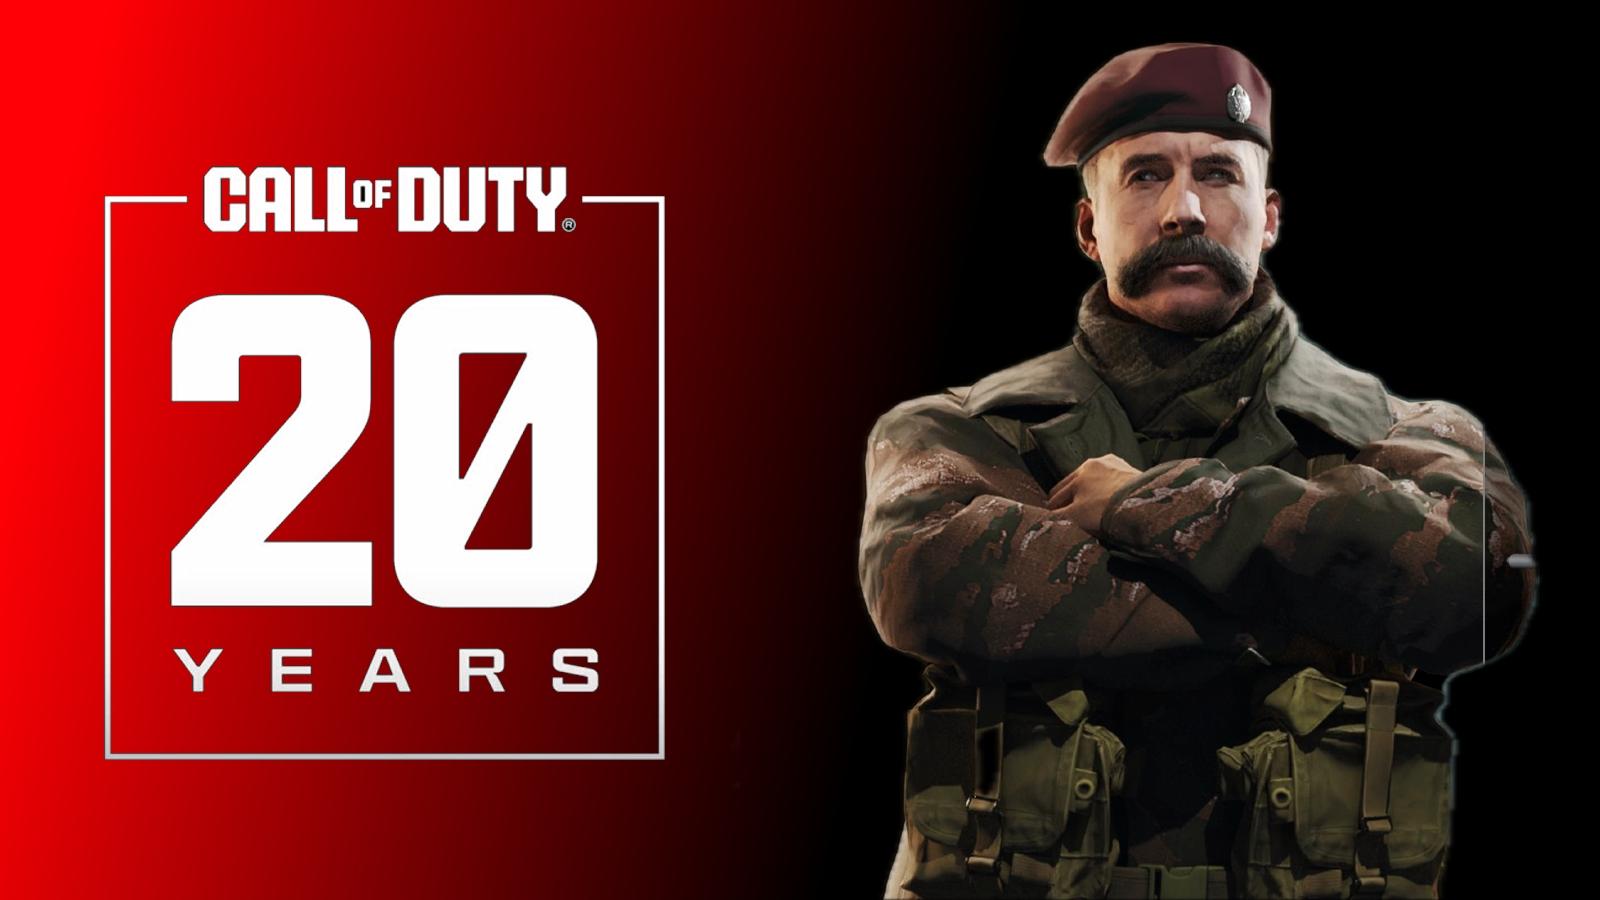 Call of Duty: Modern Warfare 2 and Warzone - All 20 Years of Call